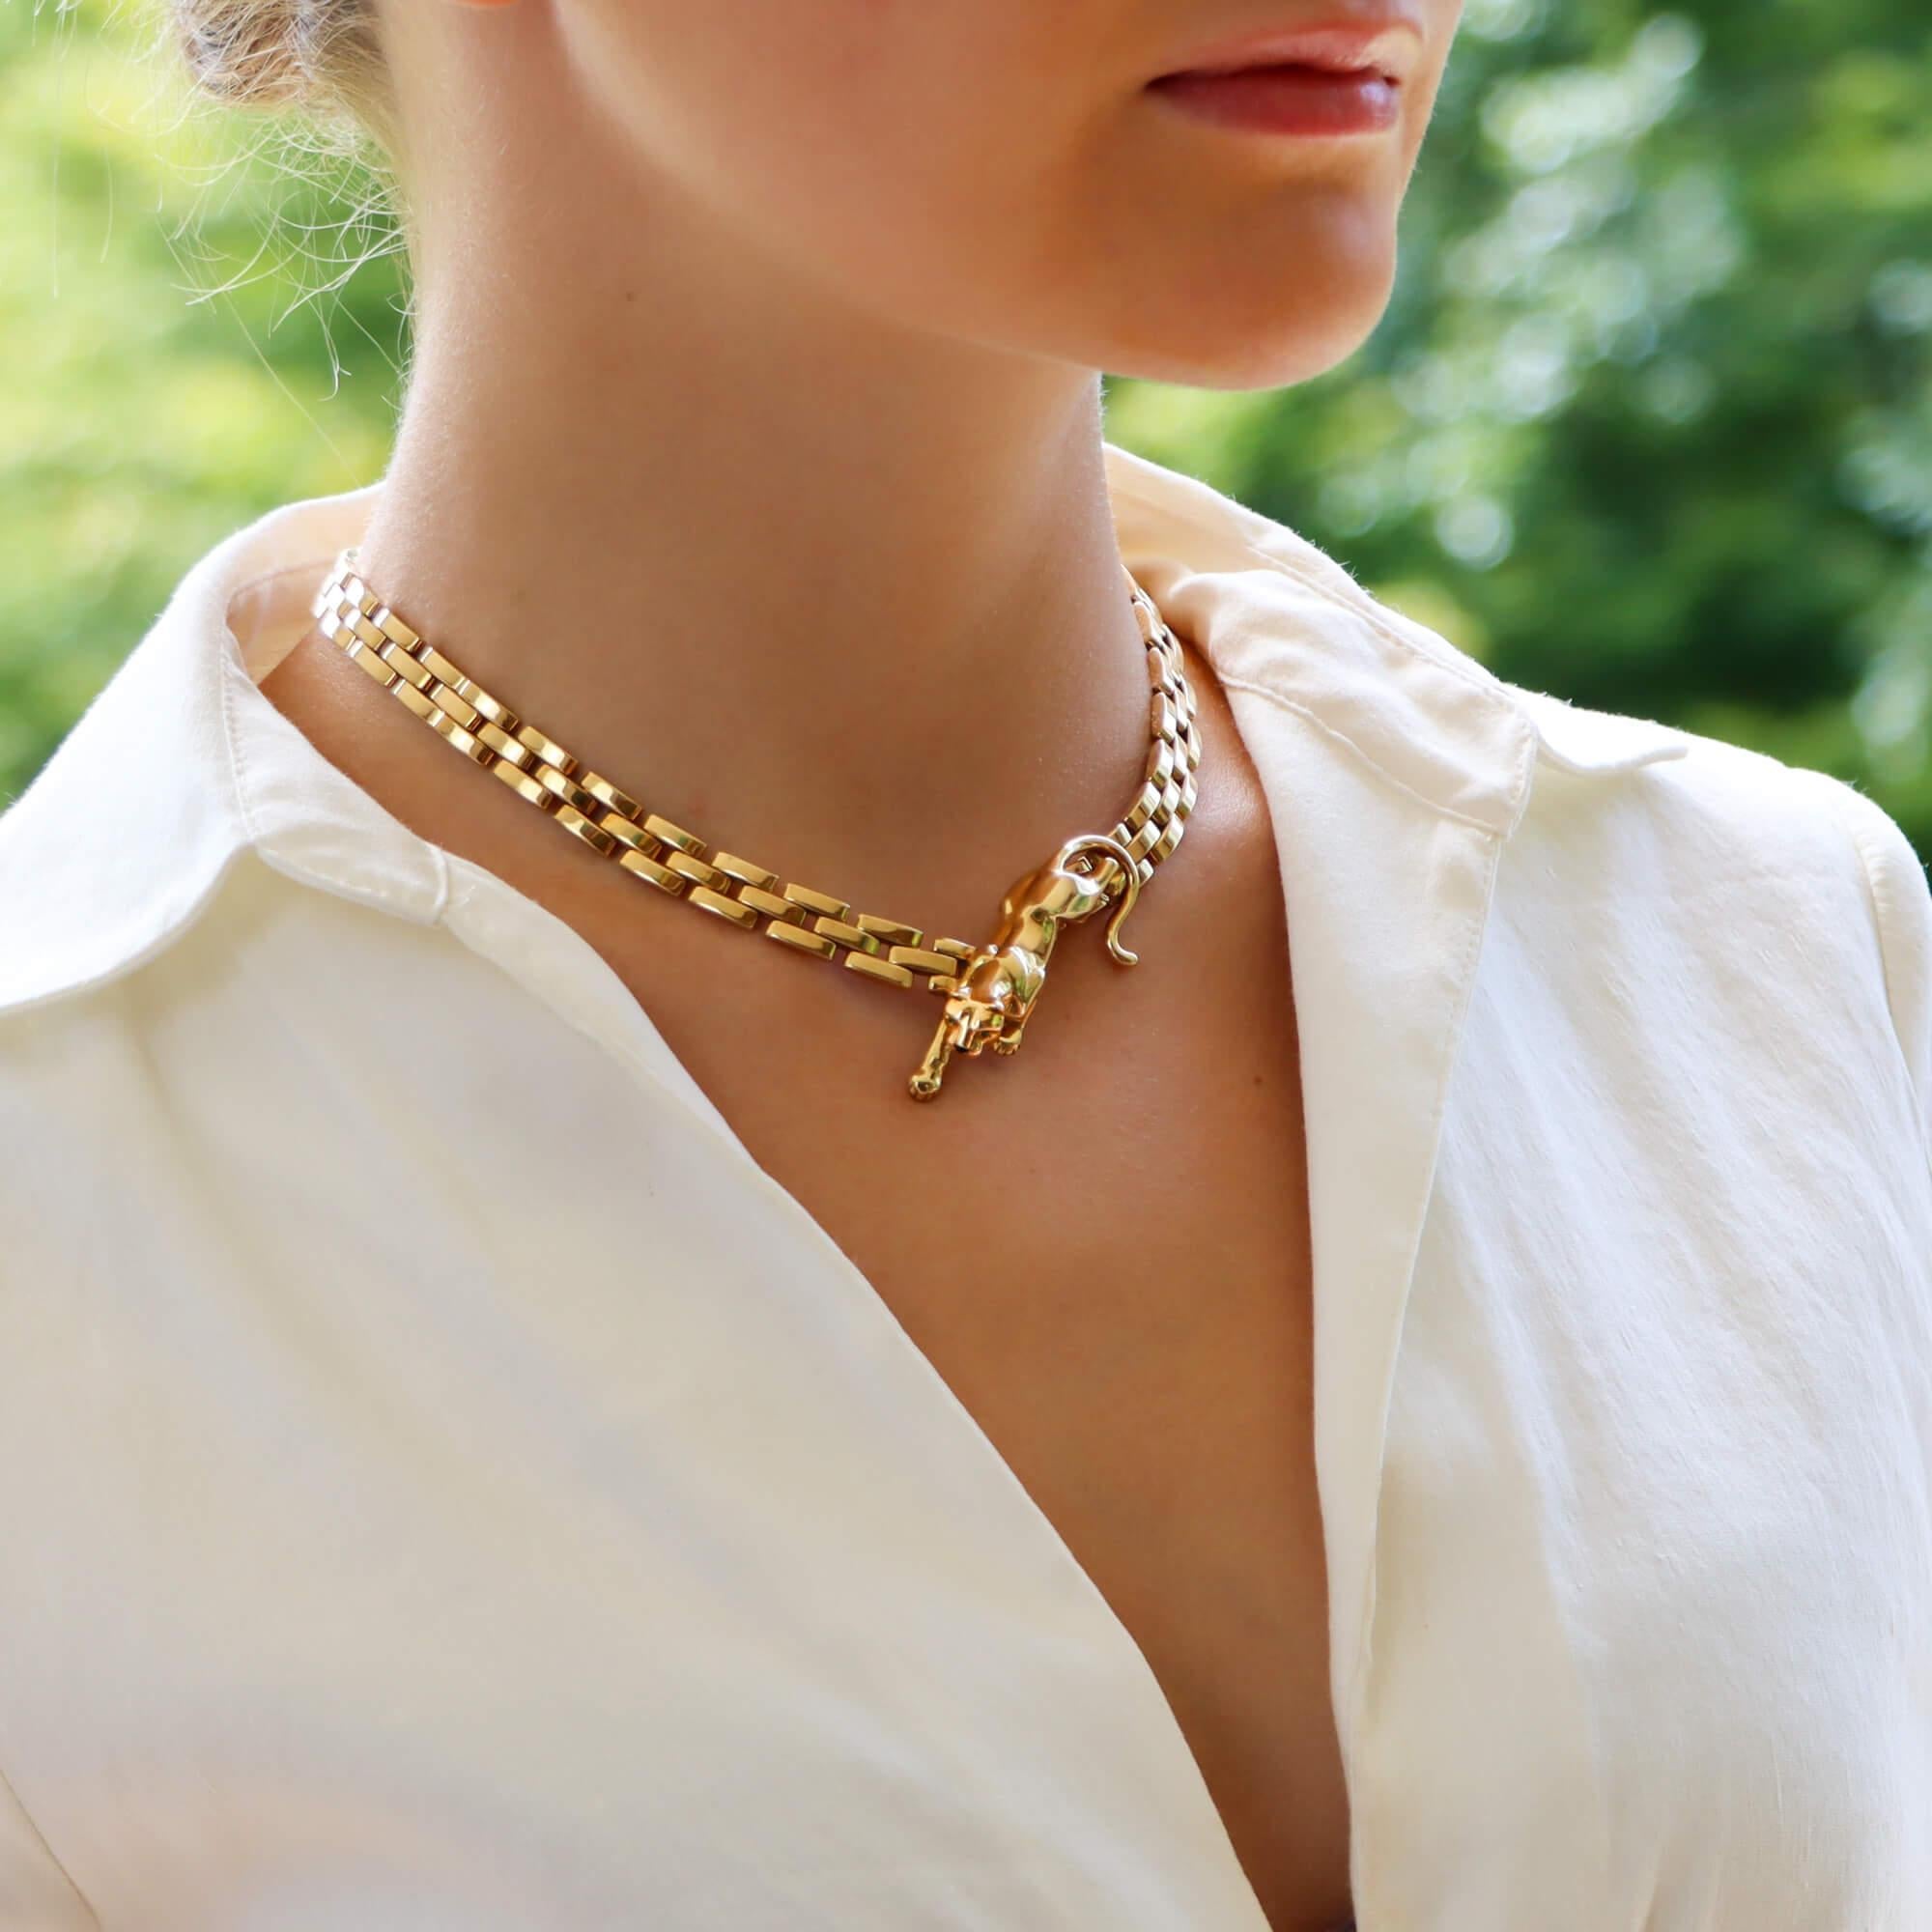 A beautiful vintage Cartier Maillon walking Panthère necklace set in solid 18k yellow gold.

The necklace is composed of exactly 96 solid gold flat links, connected in the Maillon Panthère brick link design. Set centrally within the necklace is the